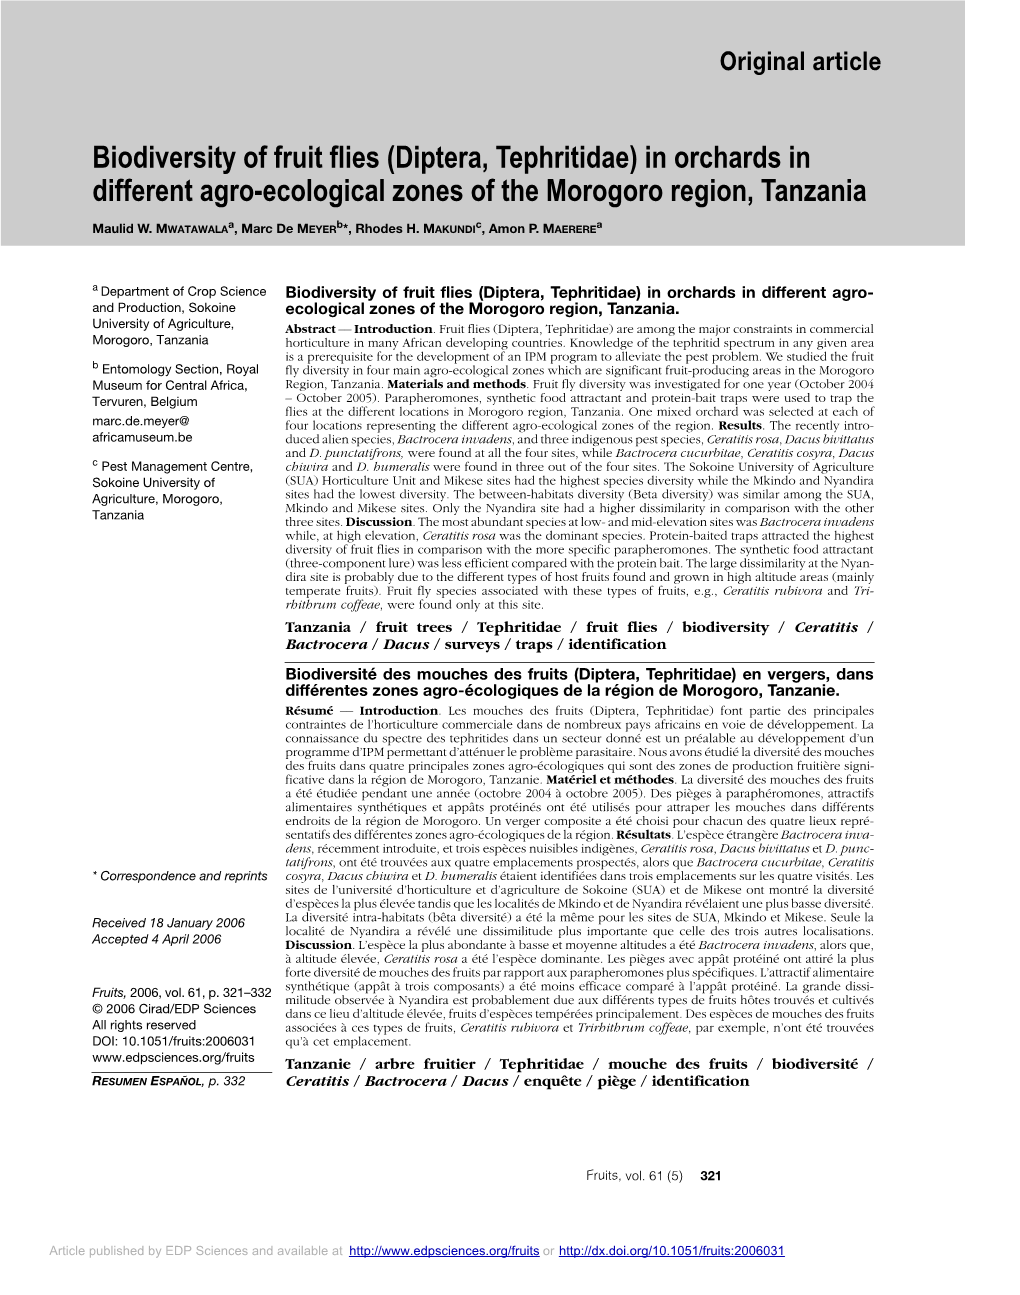 Biodiversity of Fruit Flies \(Diptera, Tephritidae\) in Orchards in Different Agro-Ecological Zones of the Morogoro Region, Tanz